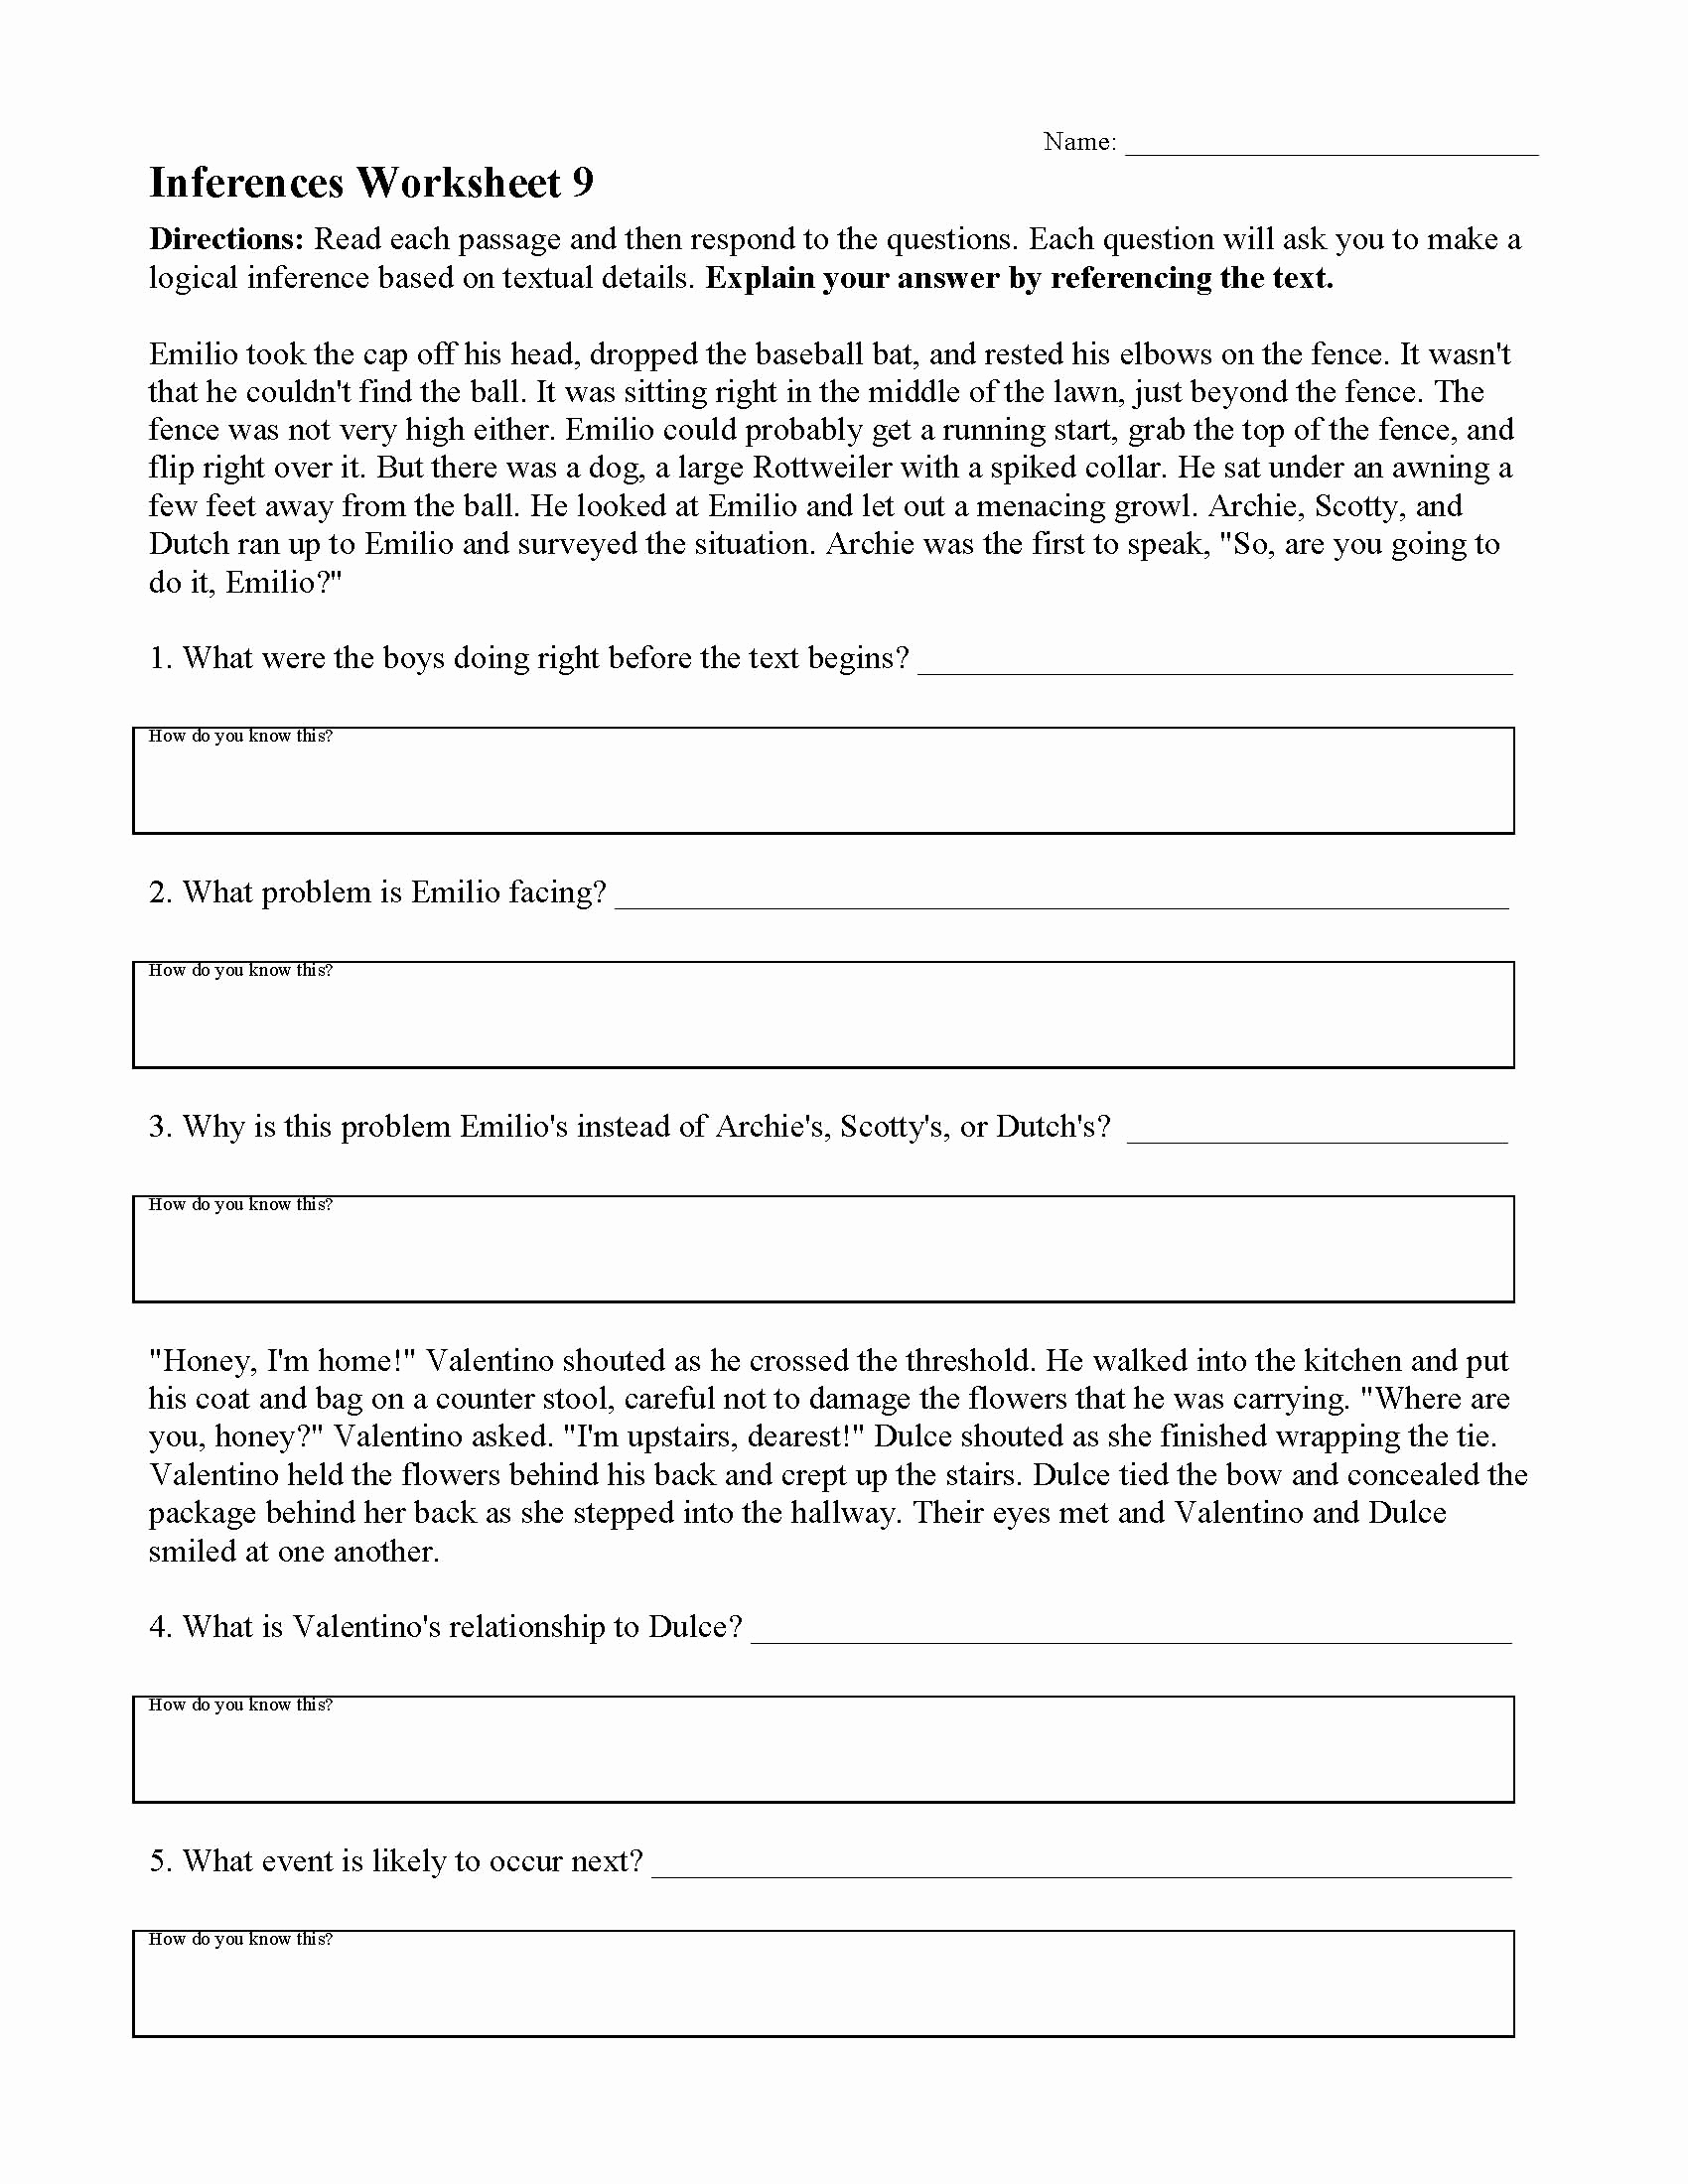 Making Predictions Worksheets 2nd Grade Luxury Making Predictions Worksheets 2nd Grade